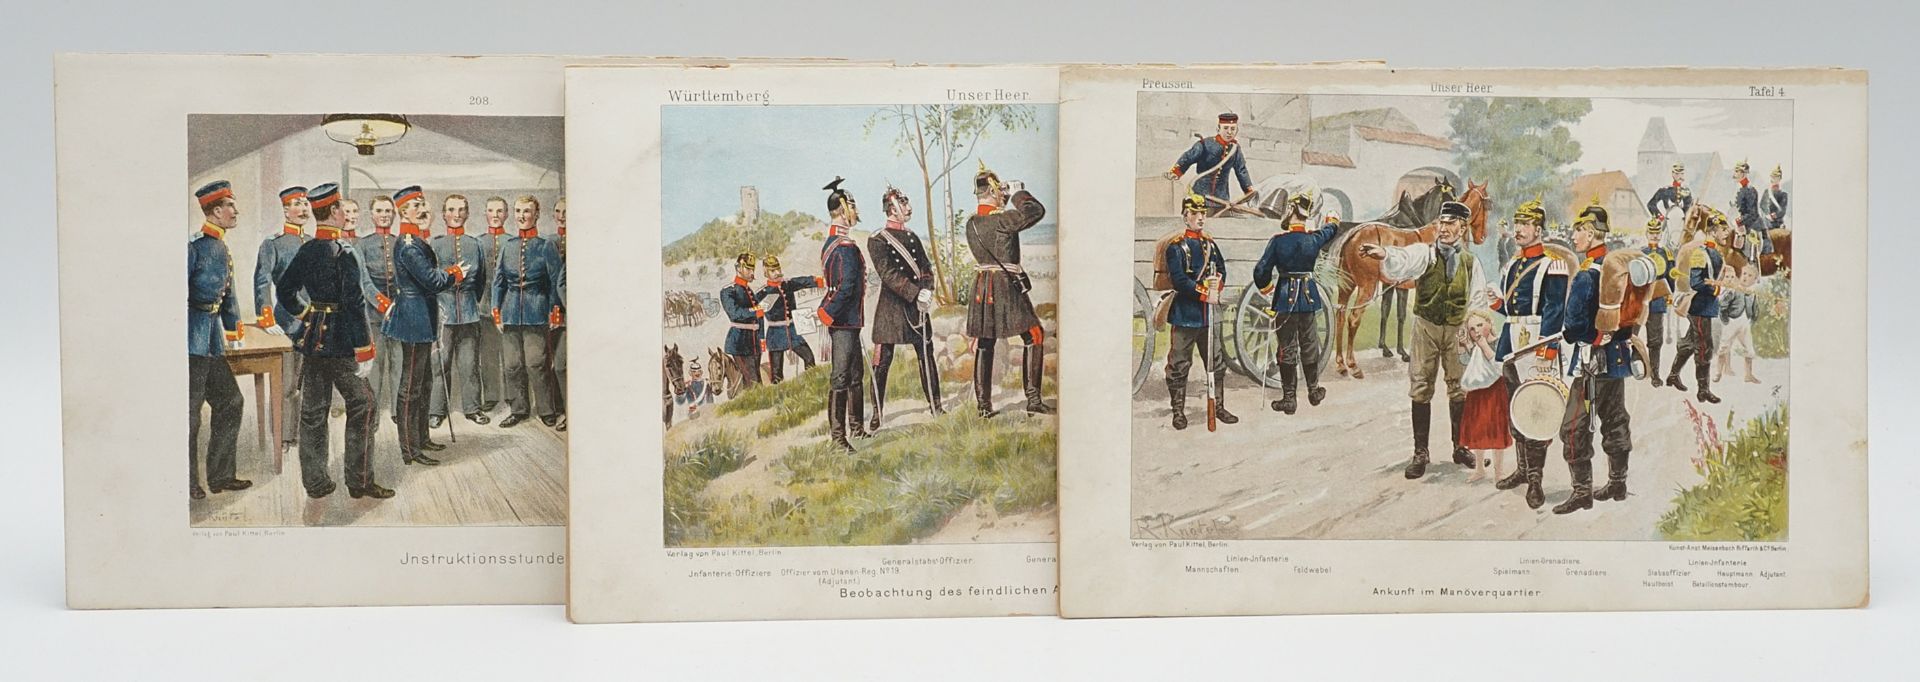 79 postcards and 23 color lithographs from the life of a soldier  - Image 2 of 4